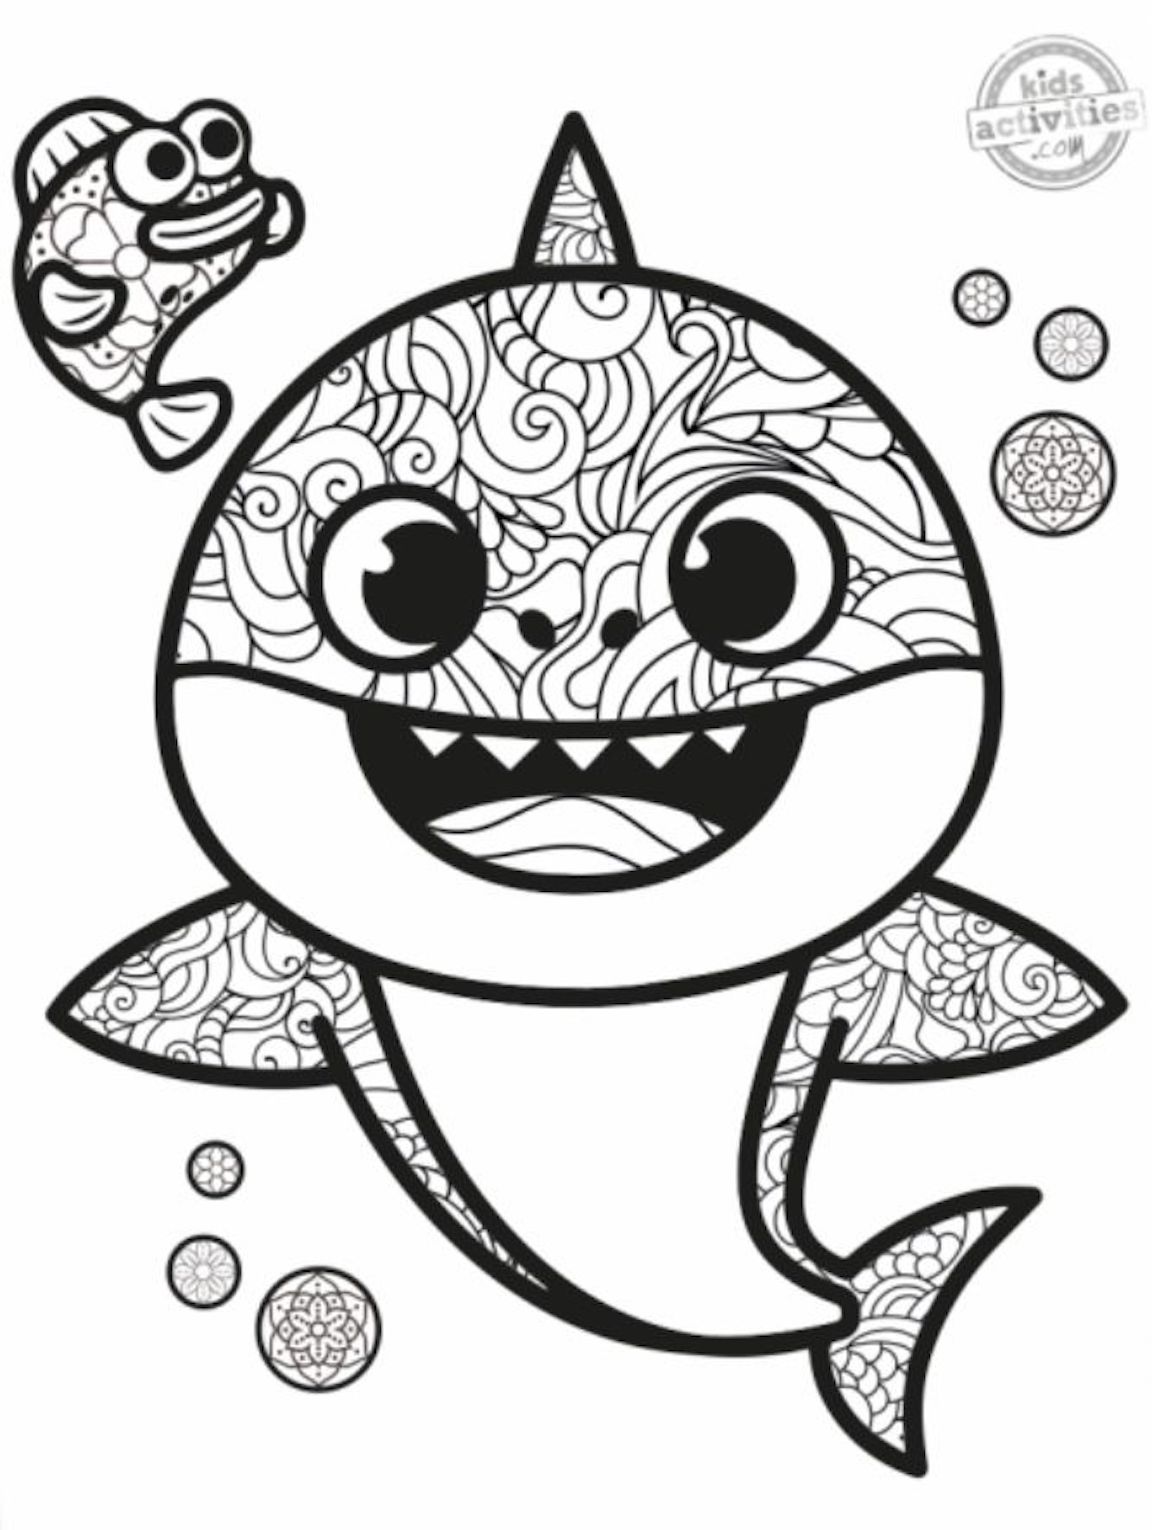 Baby Shark Coloring Pages And Other Top 10 Themed Coloring Challenges